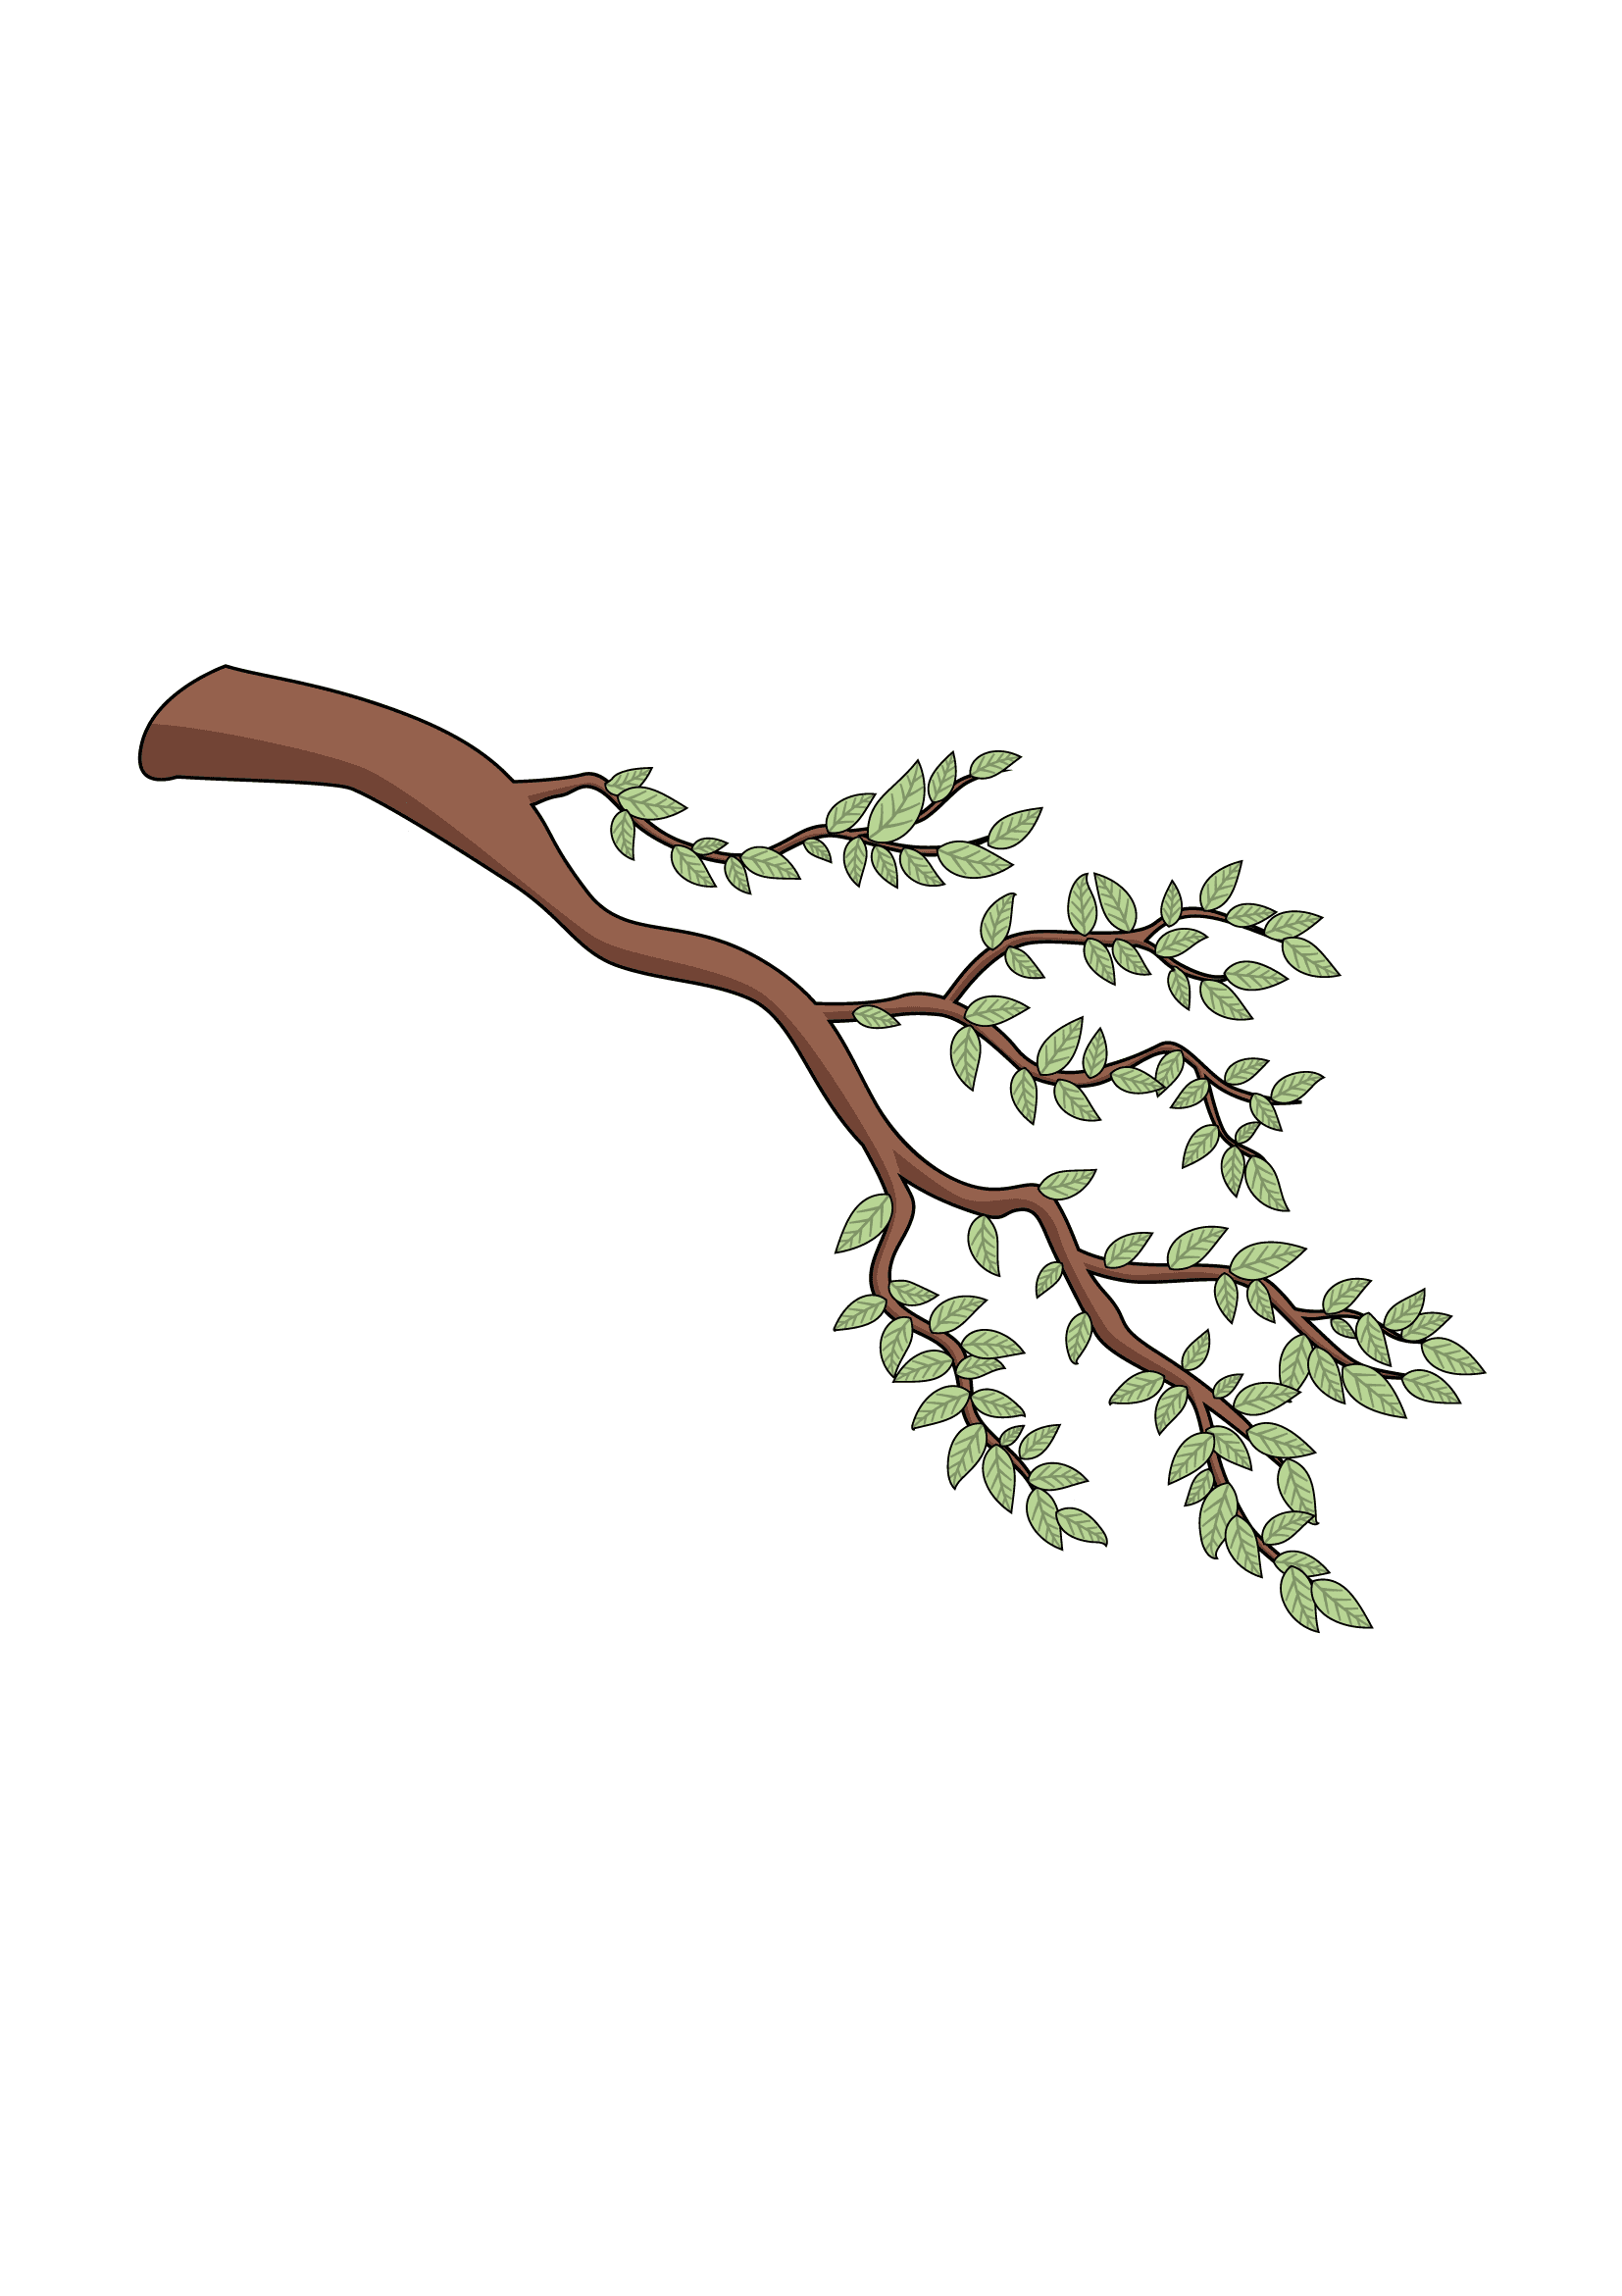 How to Draw A Tree Branch Step by Step Printable